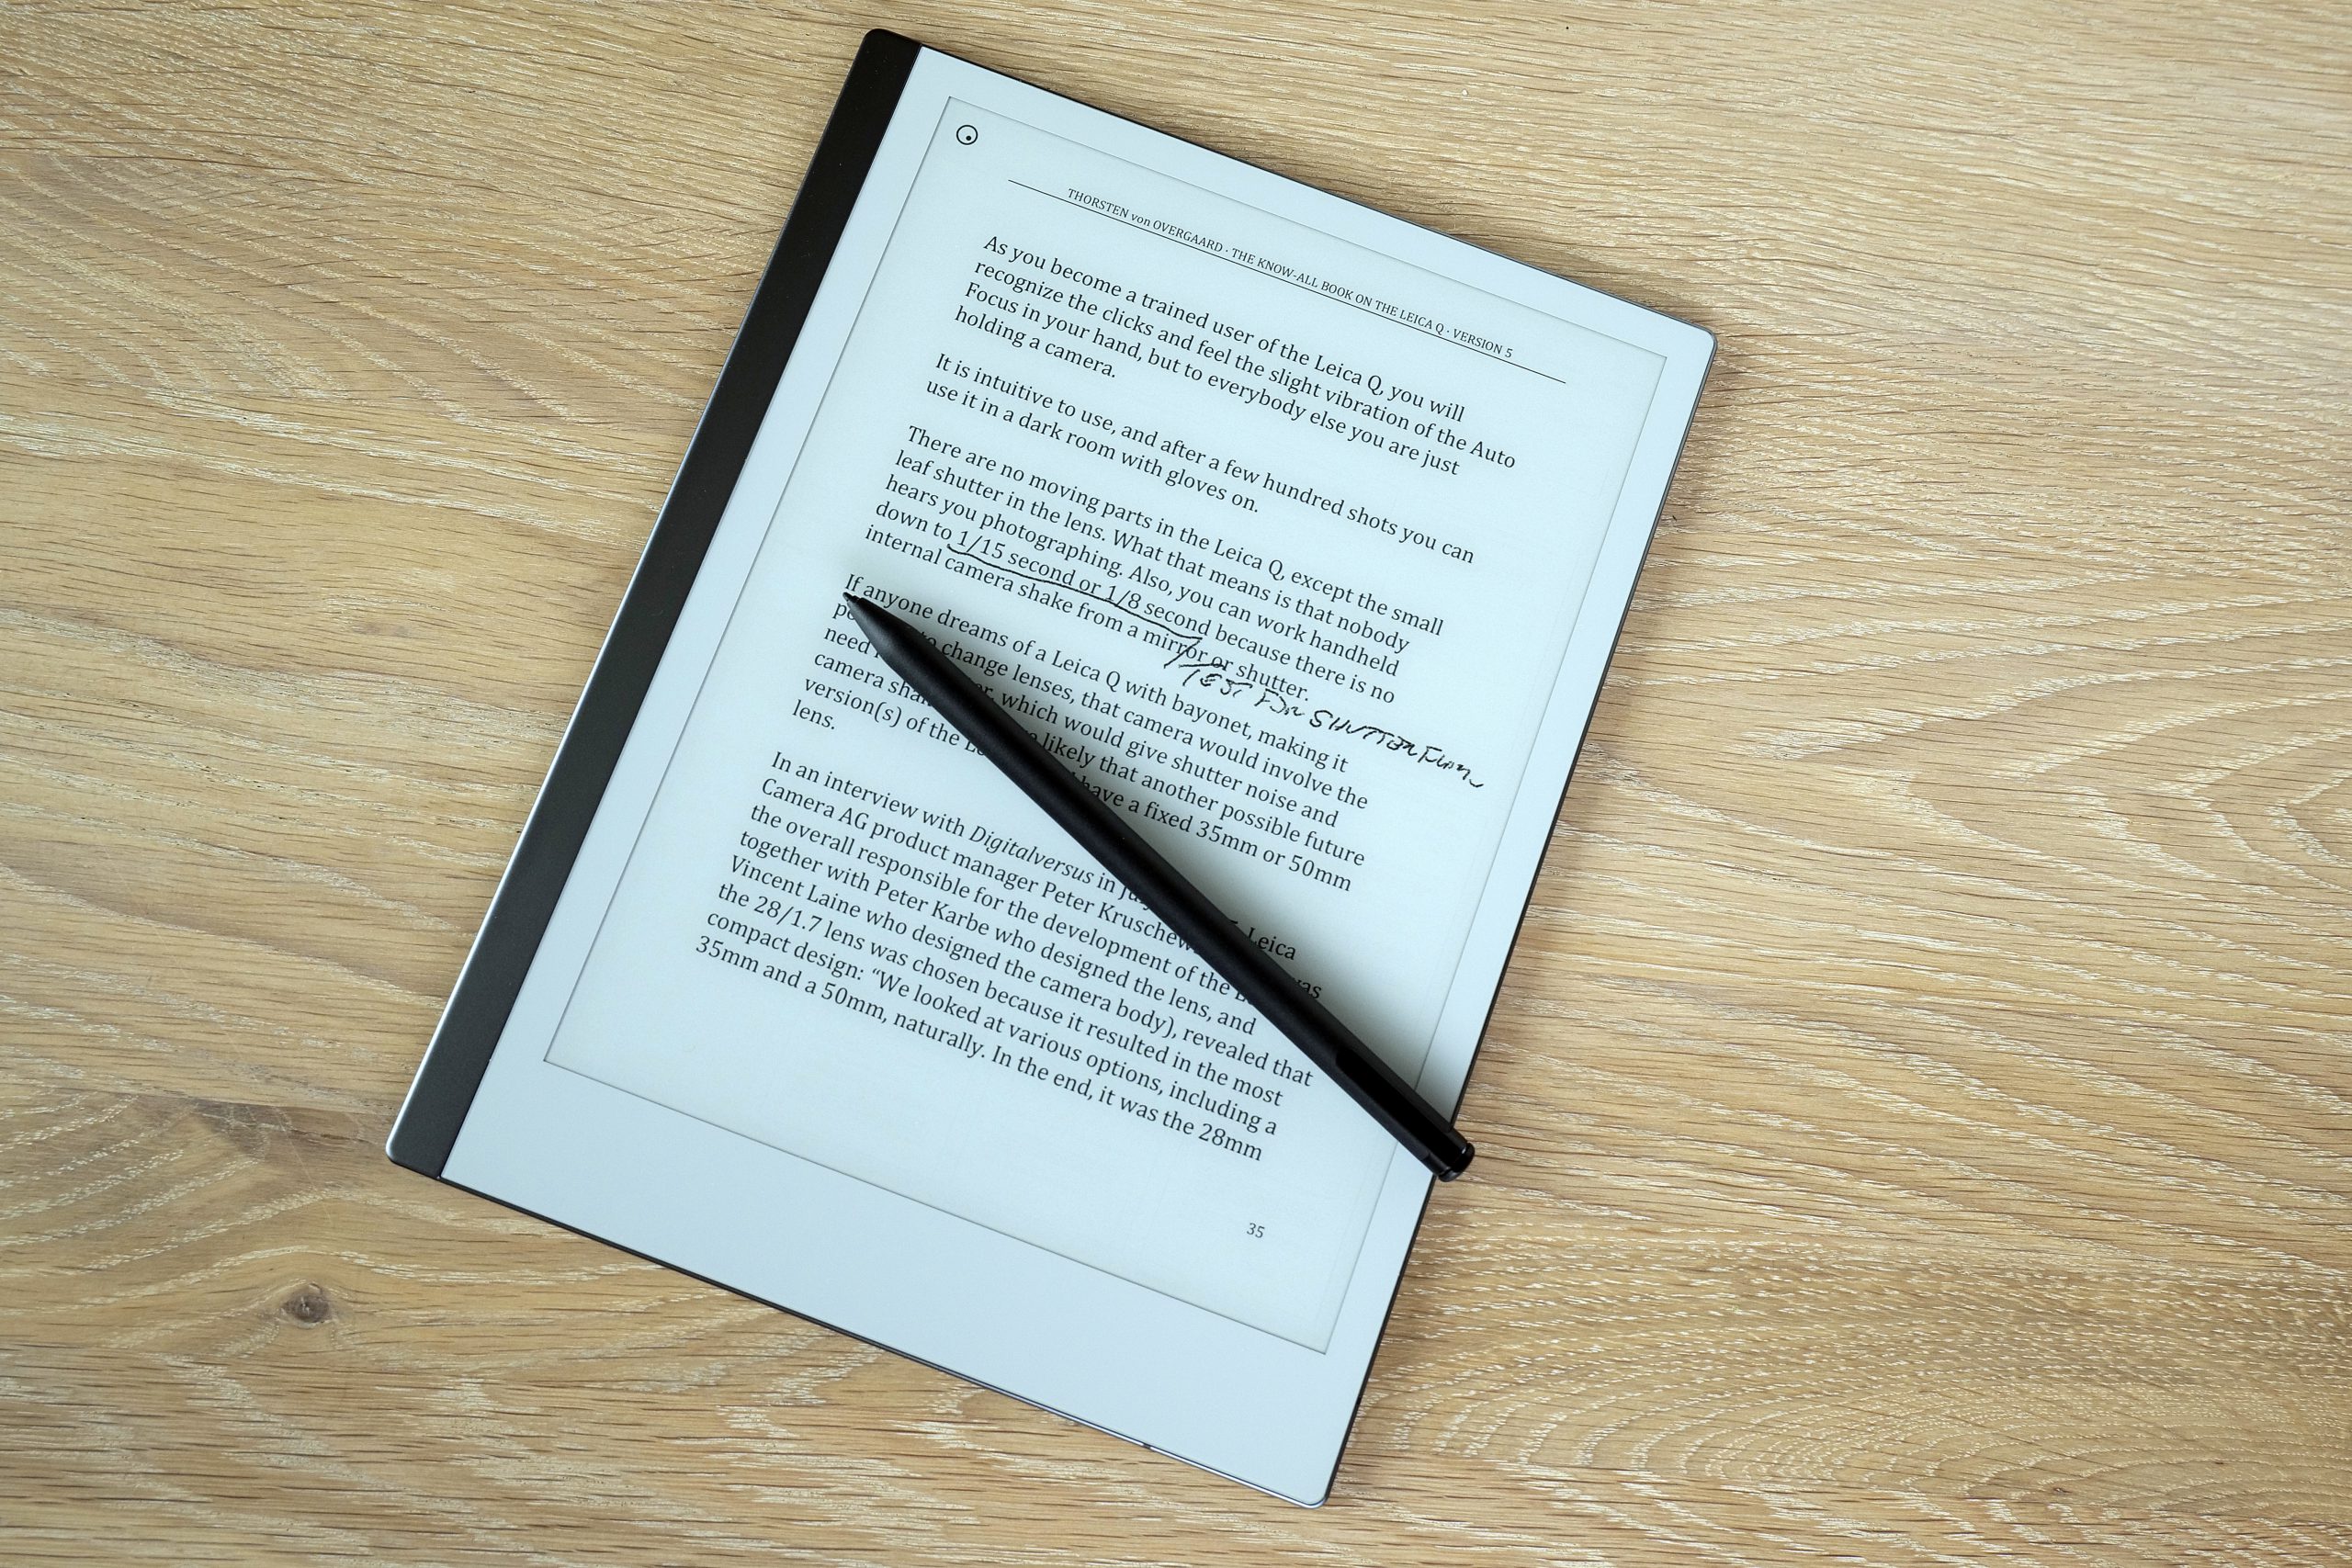 Crowdfunded reMarkable e-paper tablet ships on August 29